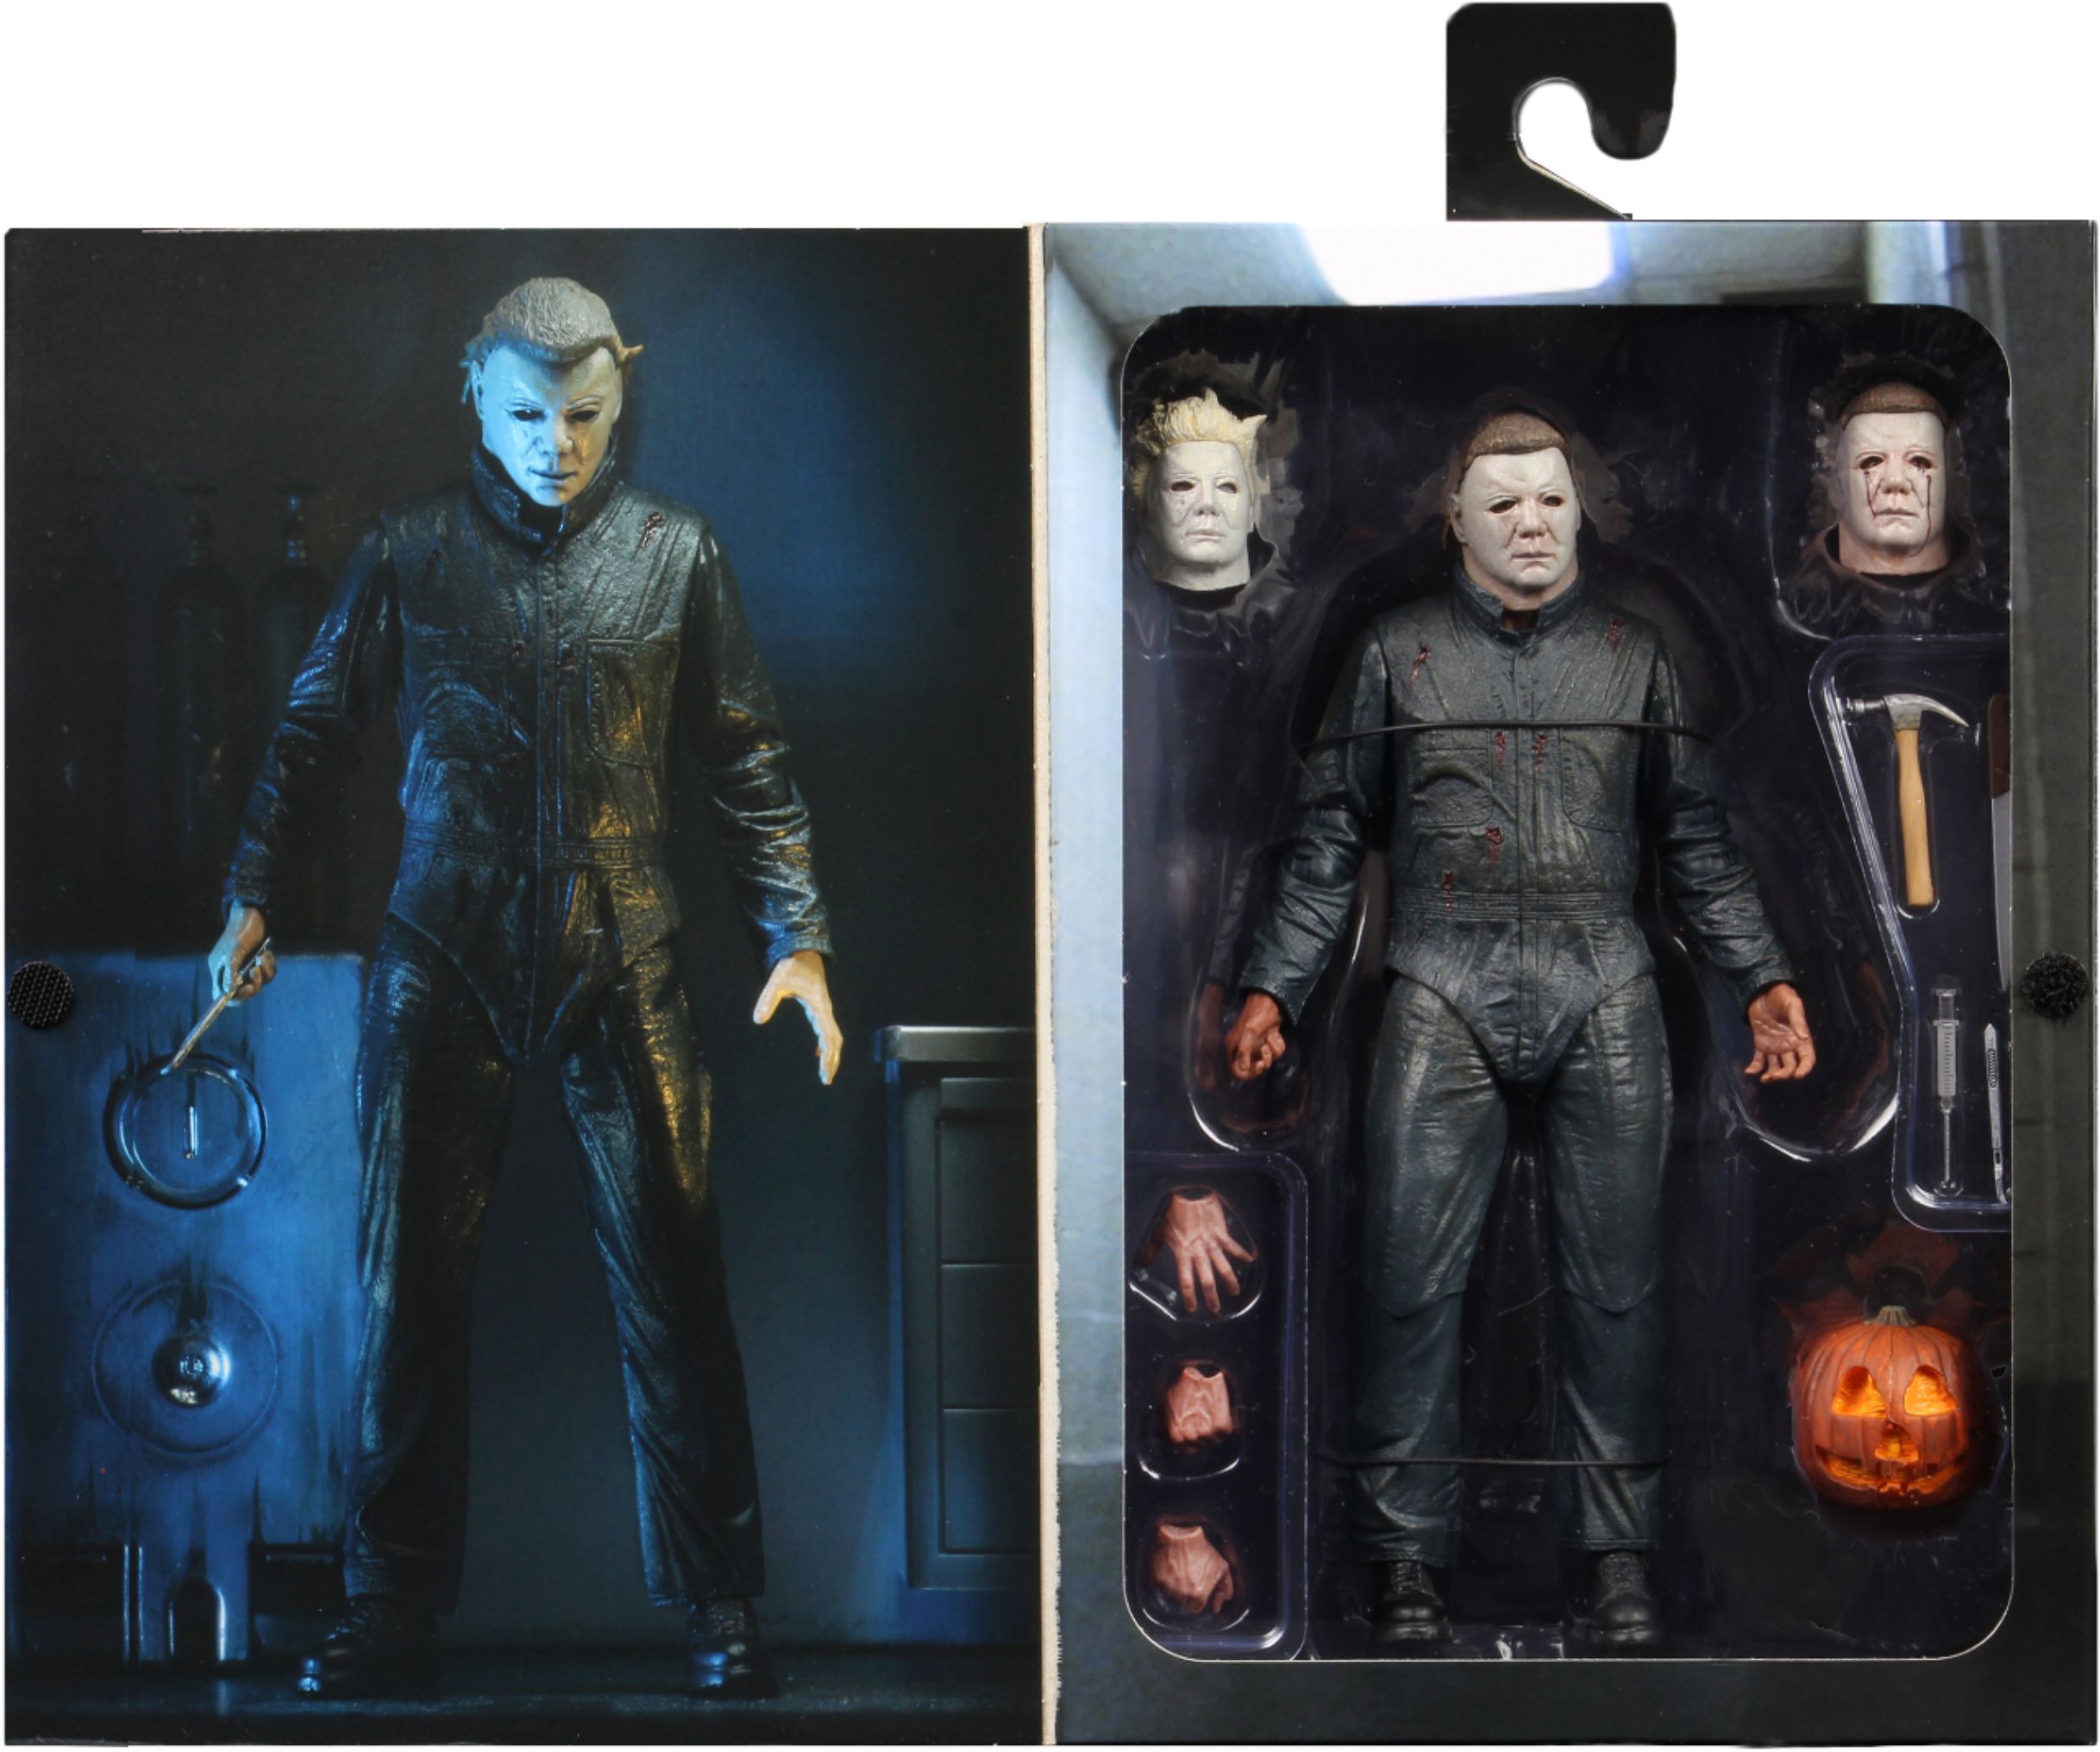 NECA 1981 Halloween 2 Ultimate Michael Myers 7 Inch Action Figure Doll for Kids for sale online 